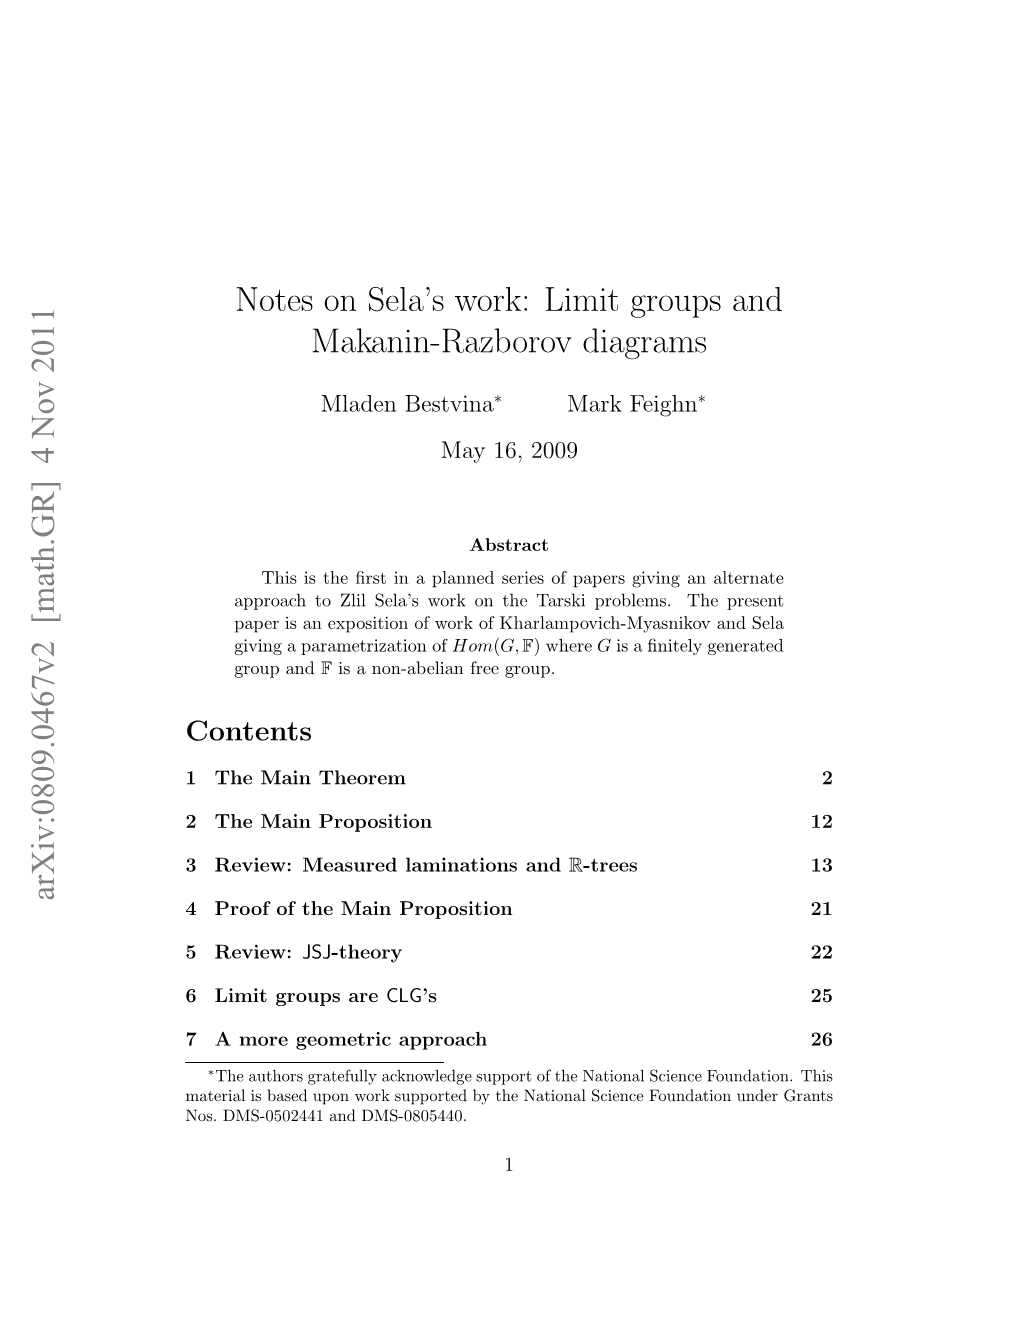 Notes on Sela's Work: Limit Groups and Makanin-Razborov Diagrams